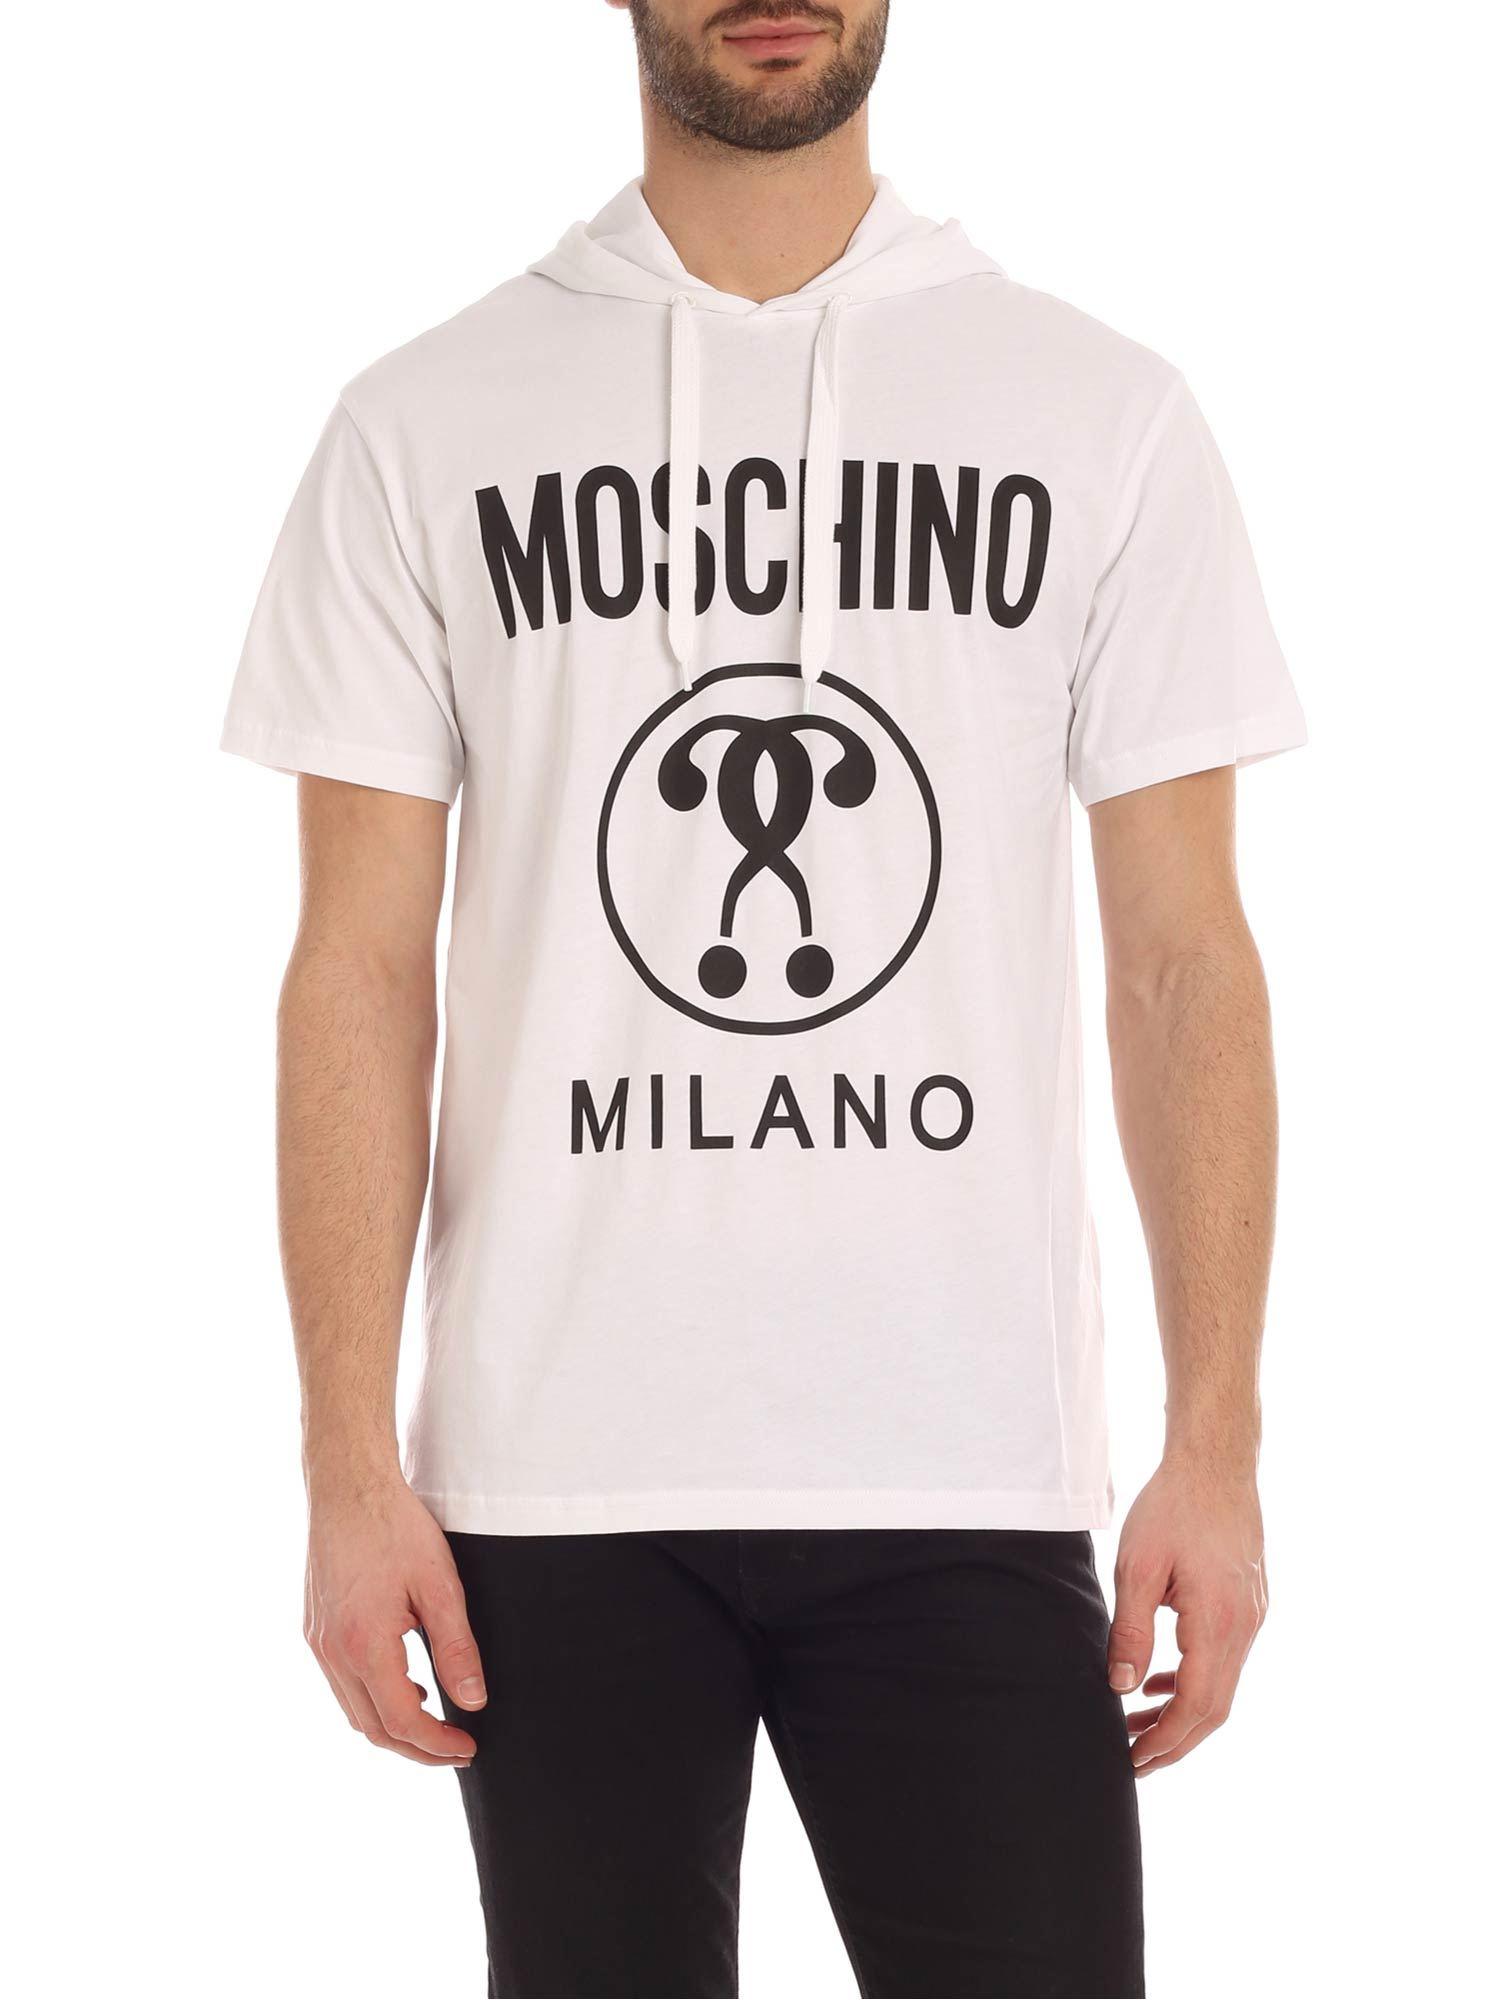 Moschino Cotton Double Question Mark T-shirt in White for Men - Lyst